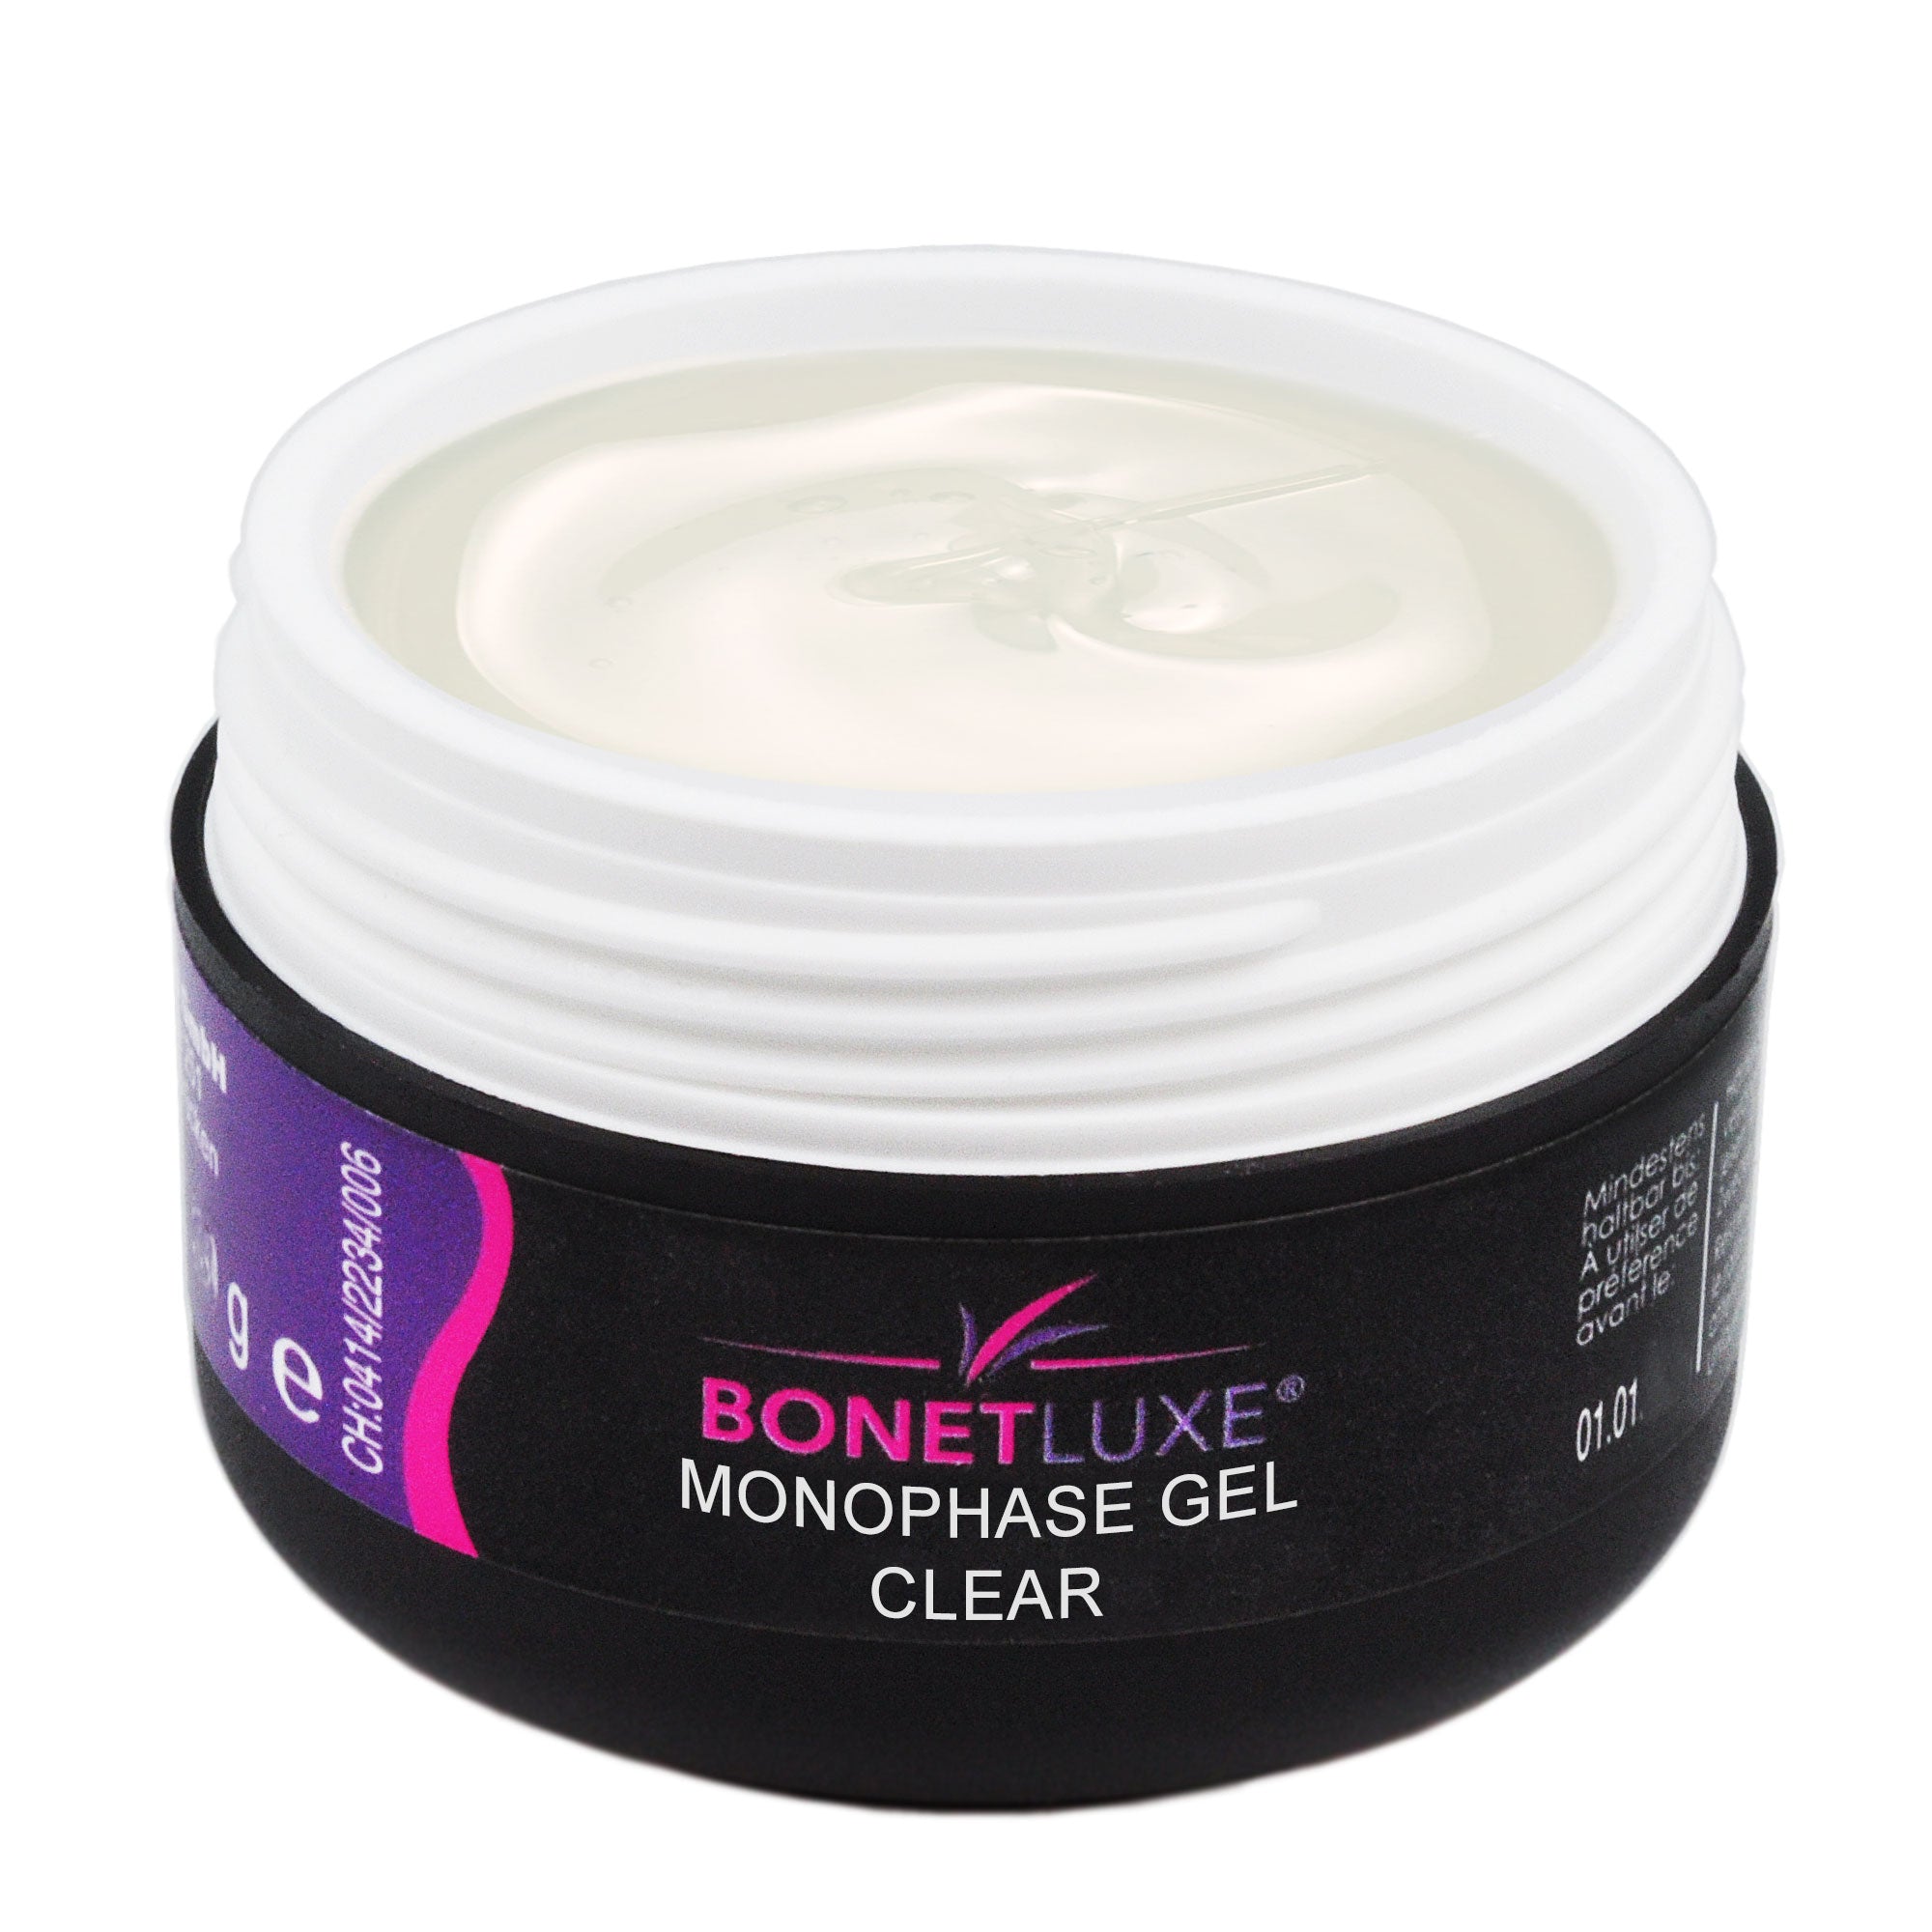  Monophase Gel CLEAR